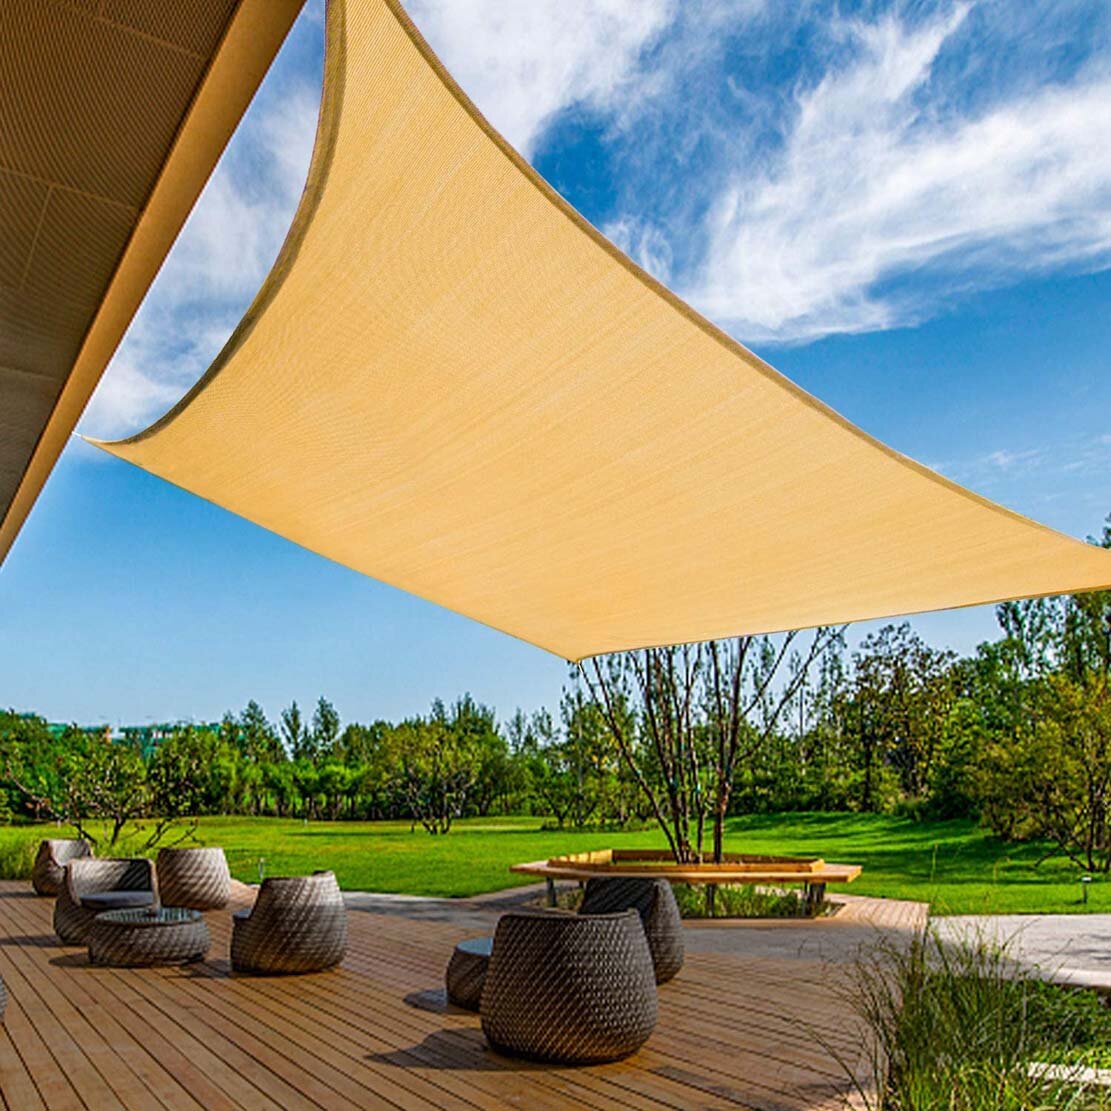 Triangle Sun Shade Sails 98/% UV Block Canopy Awning Cover for Outdoor Patio Lawn Garden Yard